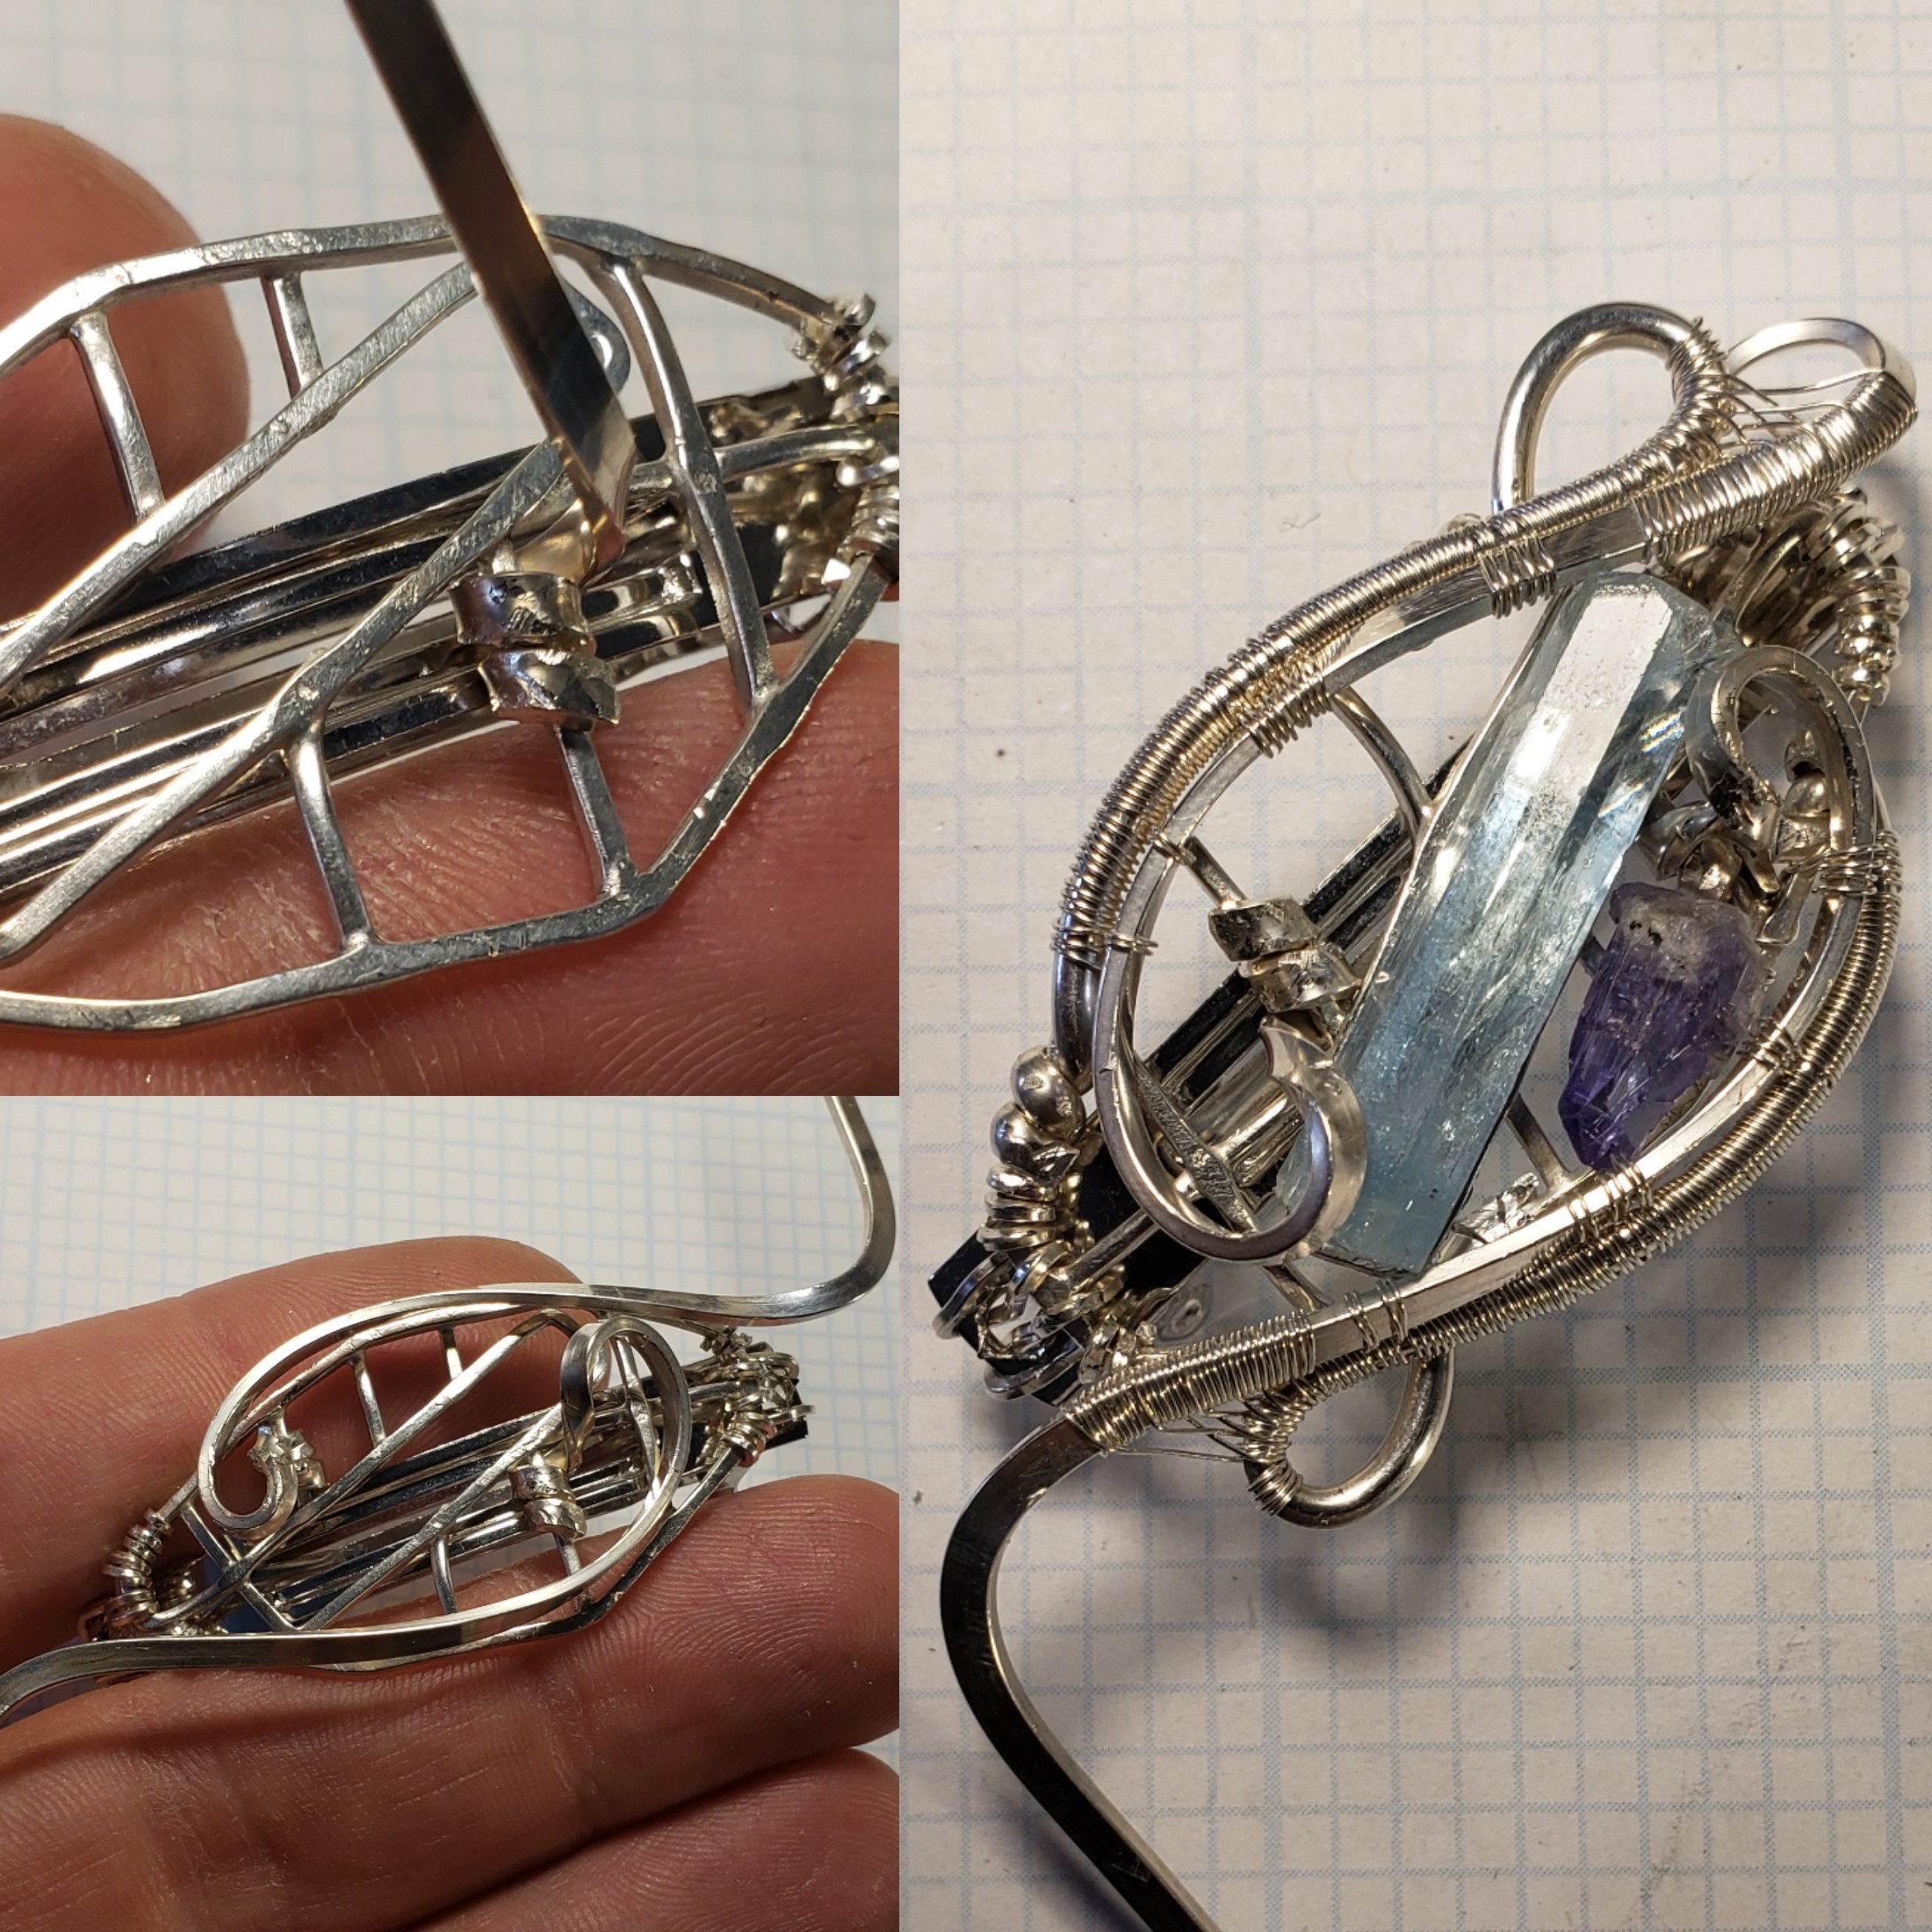 Gemstones in Wire - The Art of Wire-Wrapped Jewelry